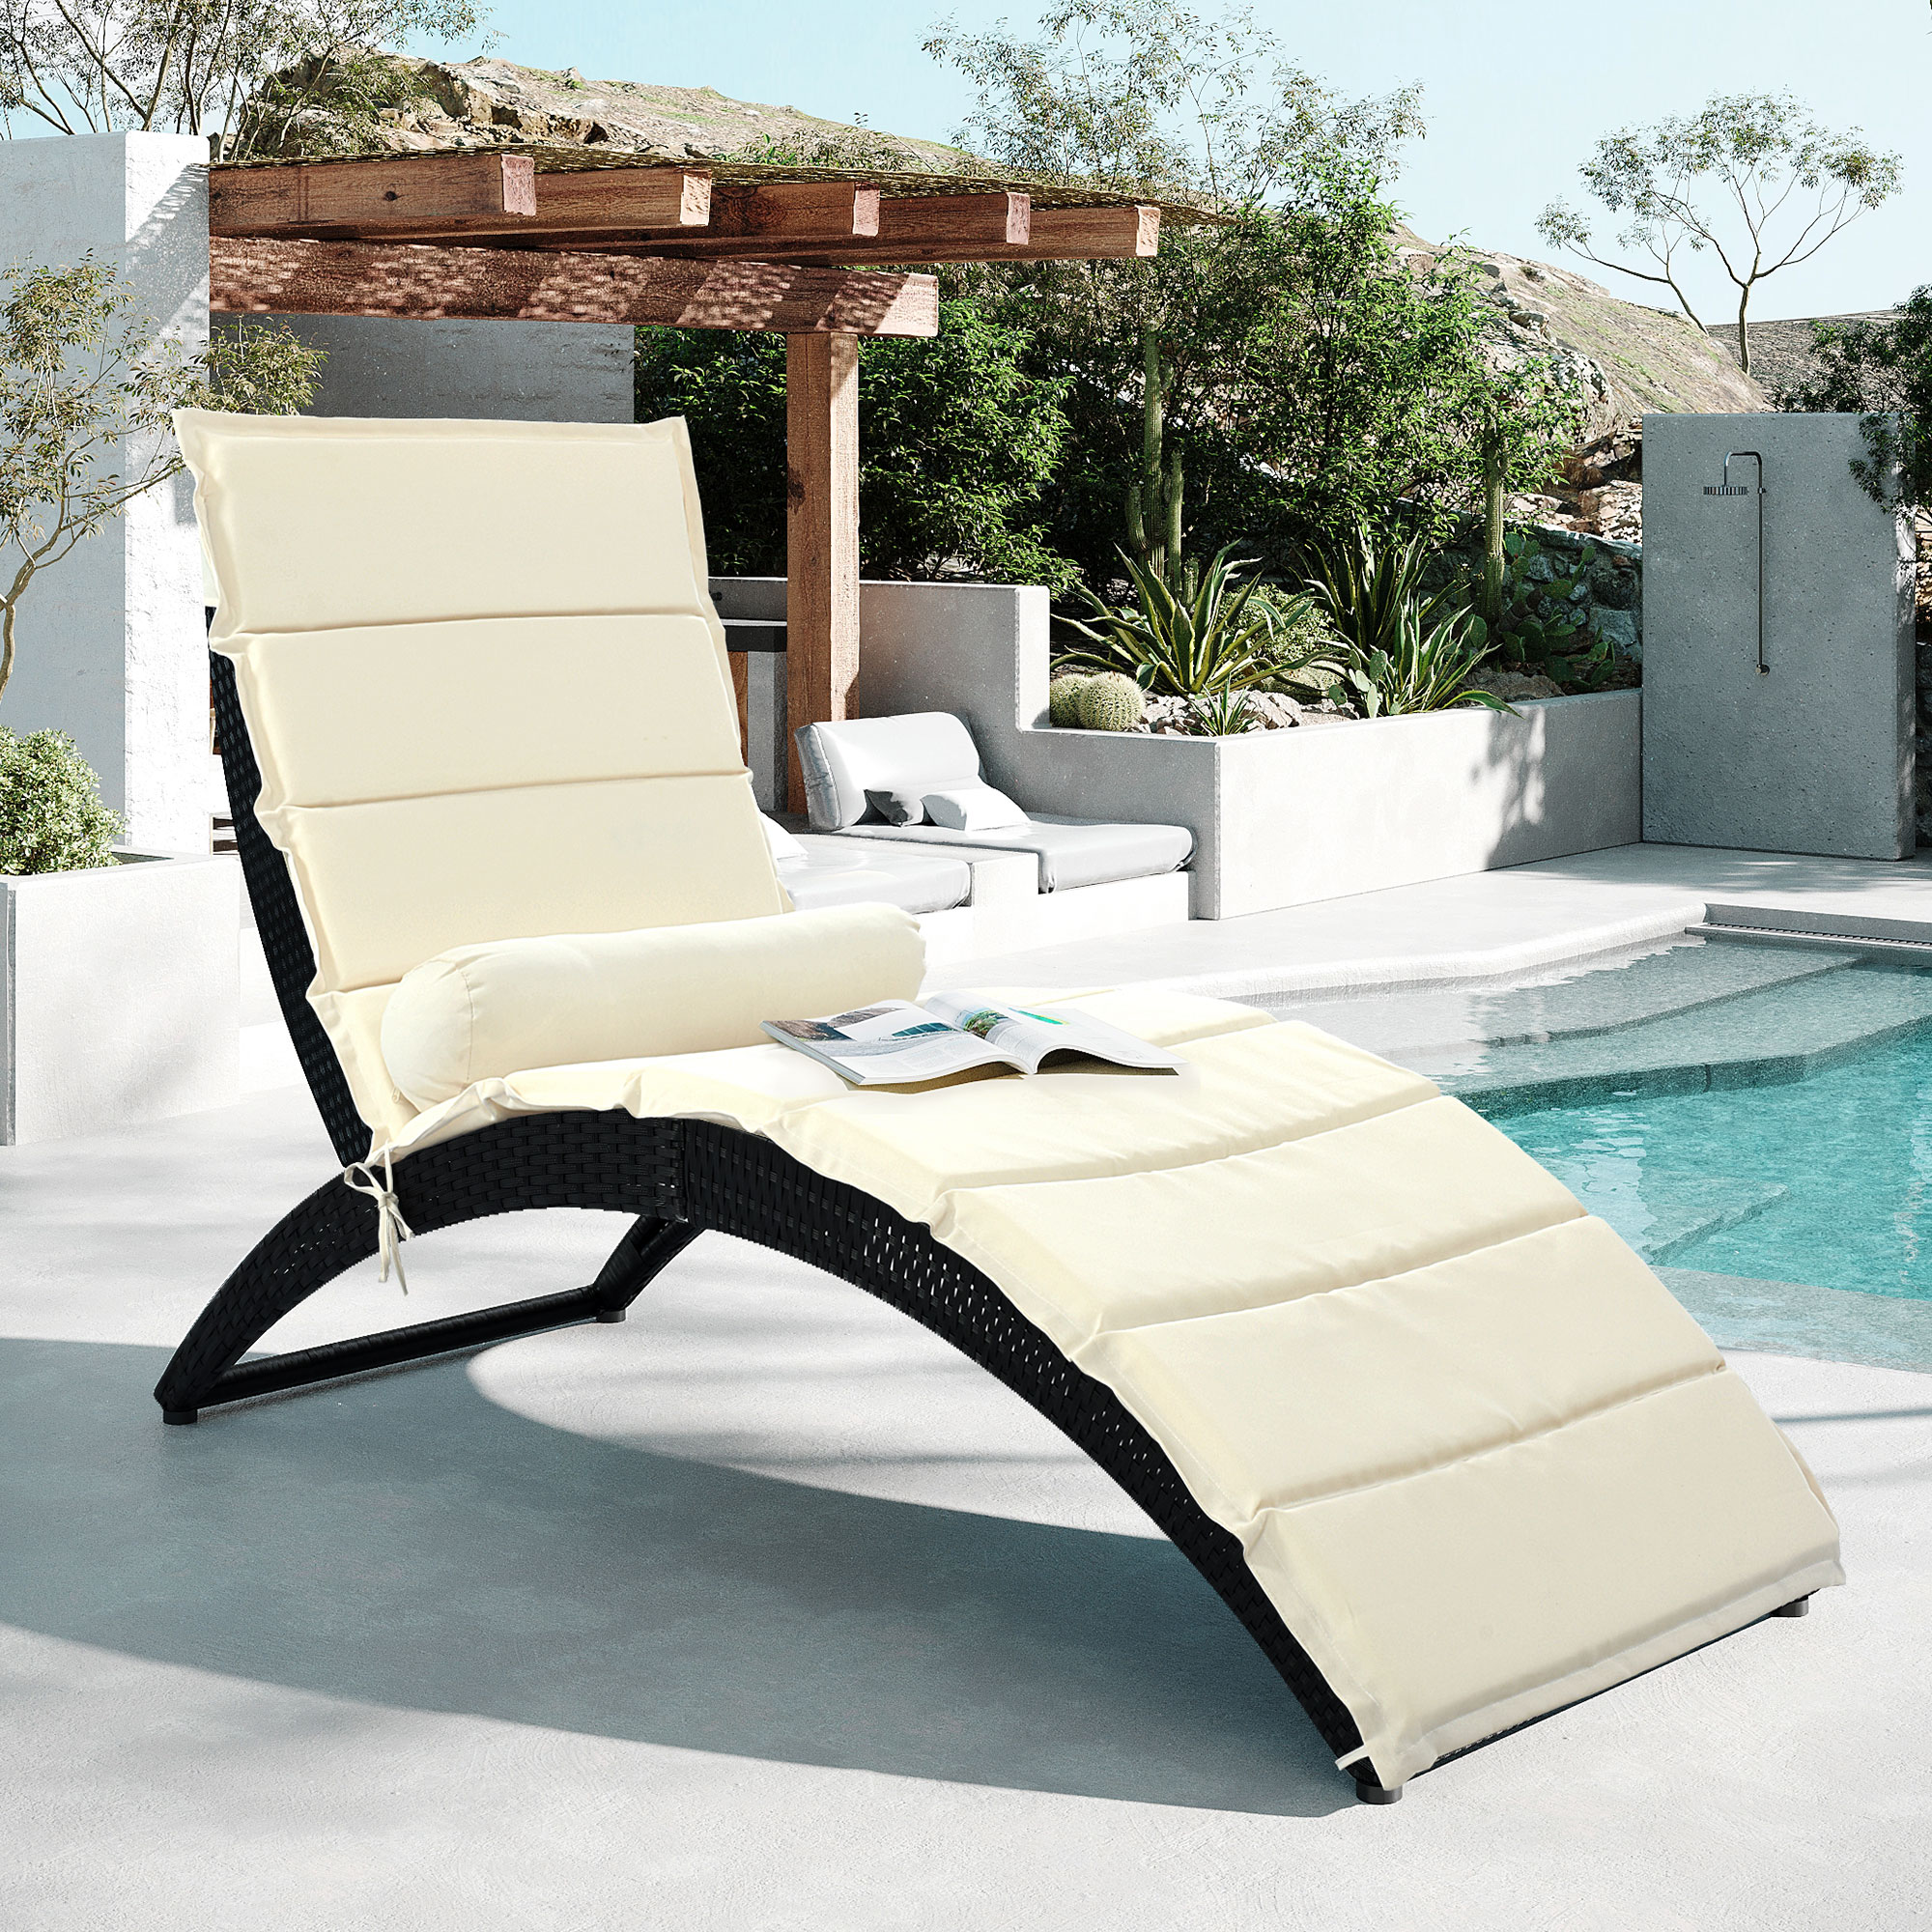 Outdoor Chaise Lounge Chair, Patio Reclining Sun Lounger, PE Wicker Rattan Foldable Lounge Chair with Steel Frame, Cushions, and Bolster Pillow, Reclining Chair for Poolside, Deck, Backyard, Beige - image 1 of 10